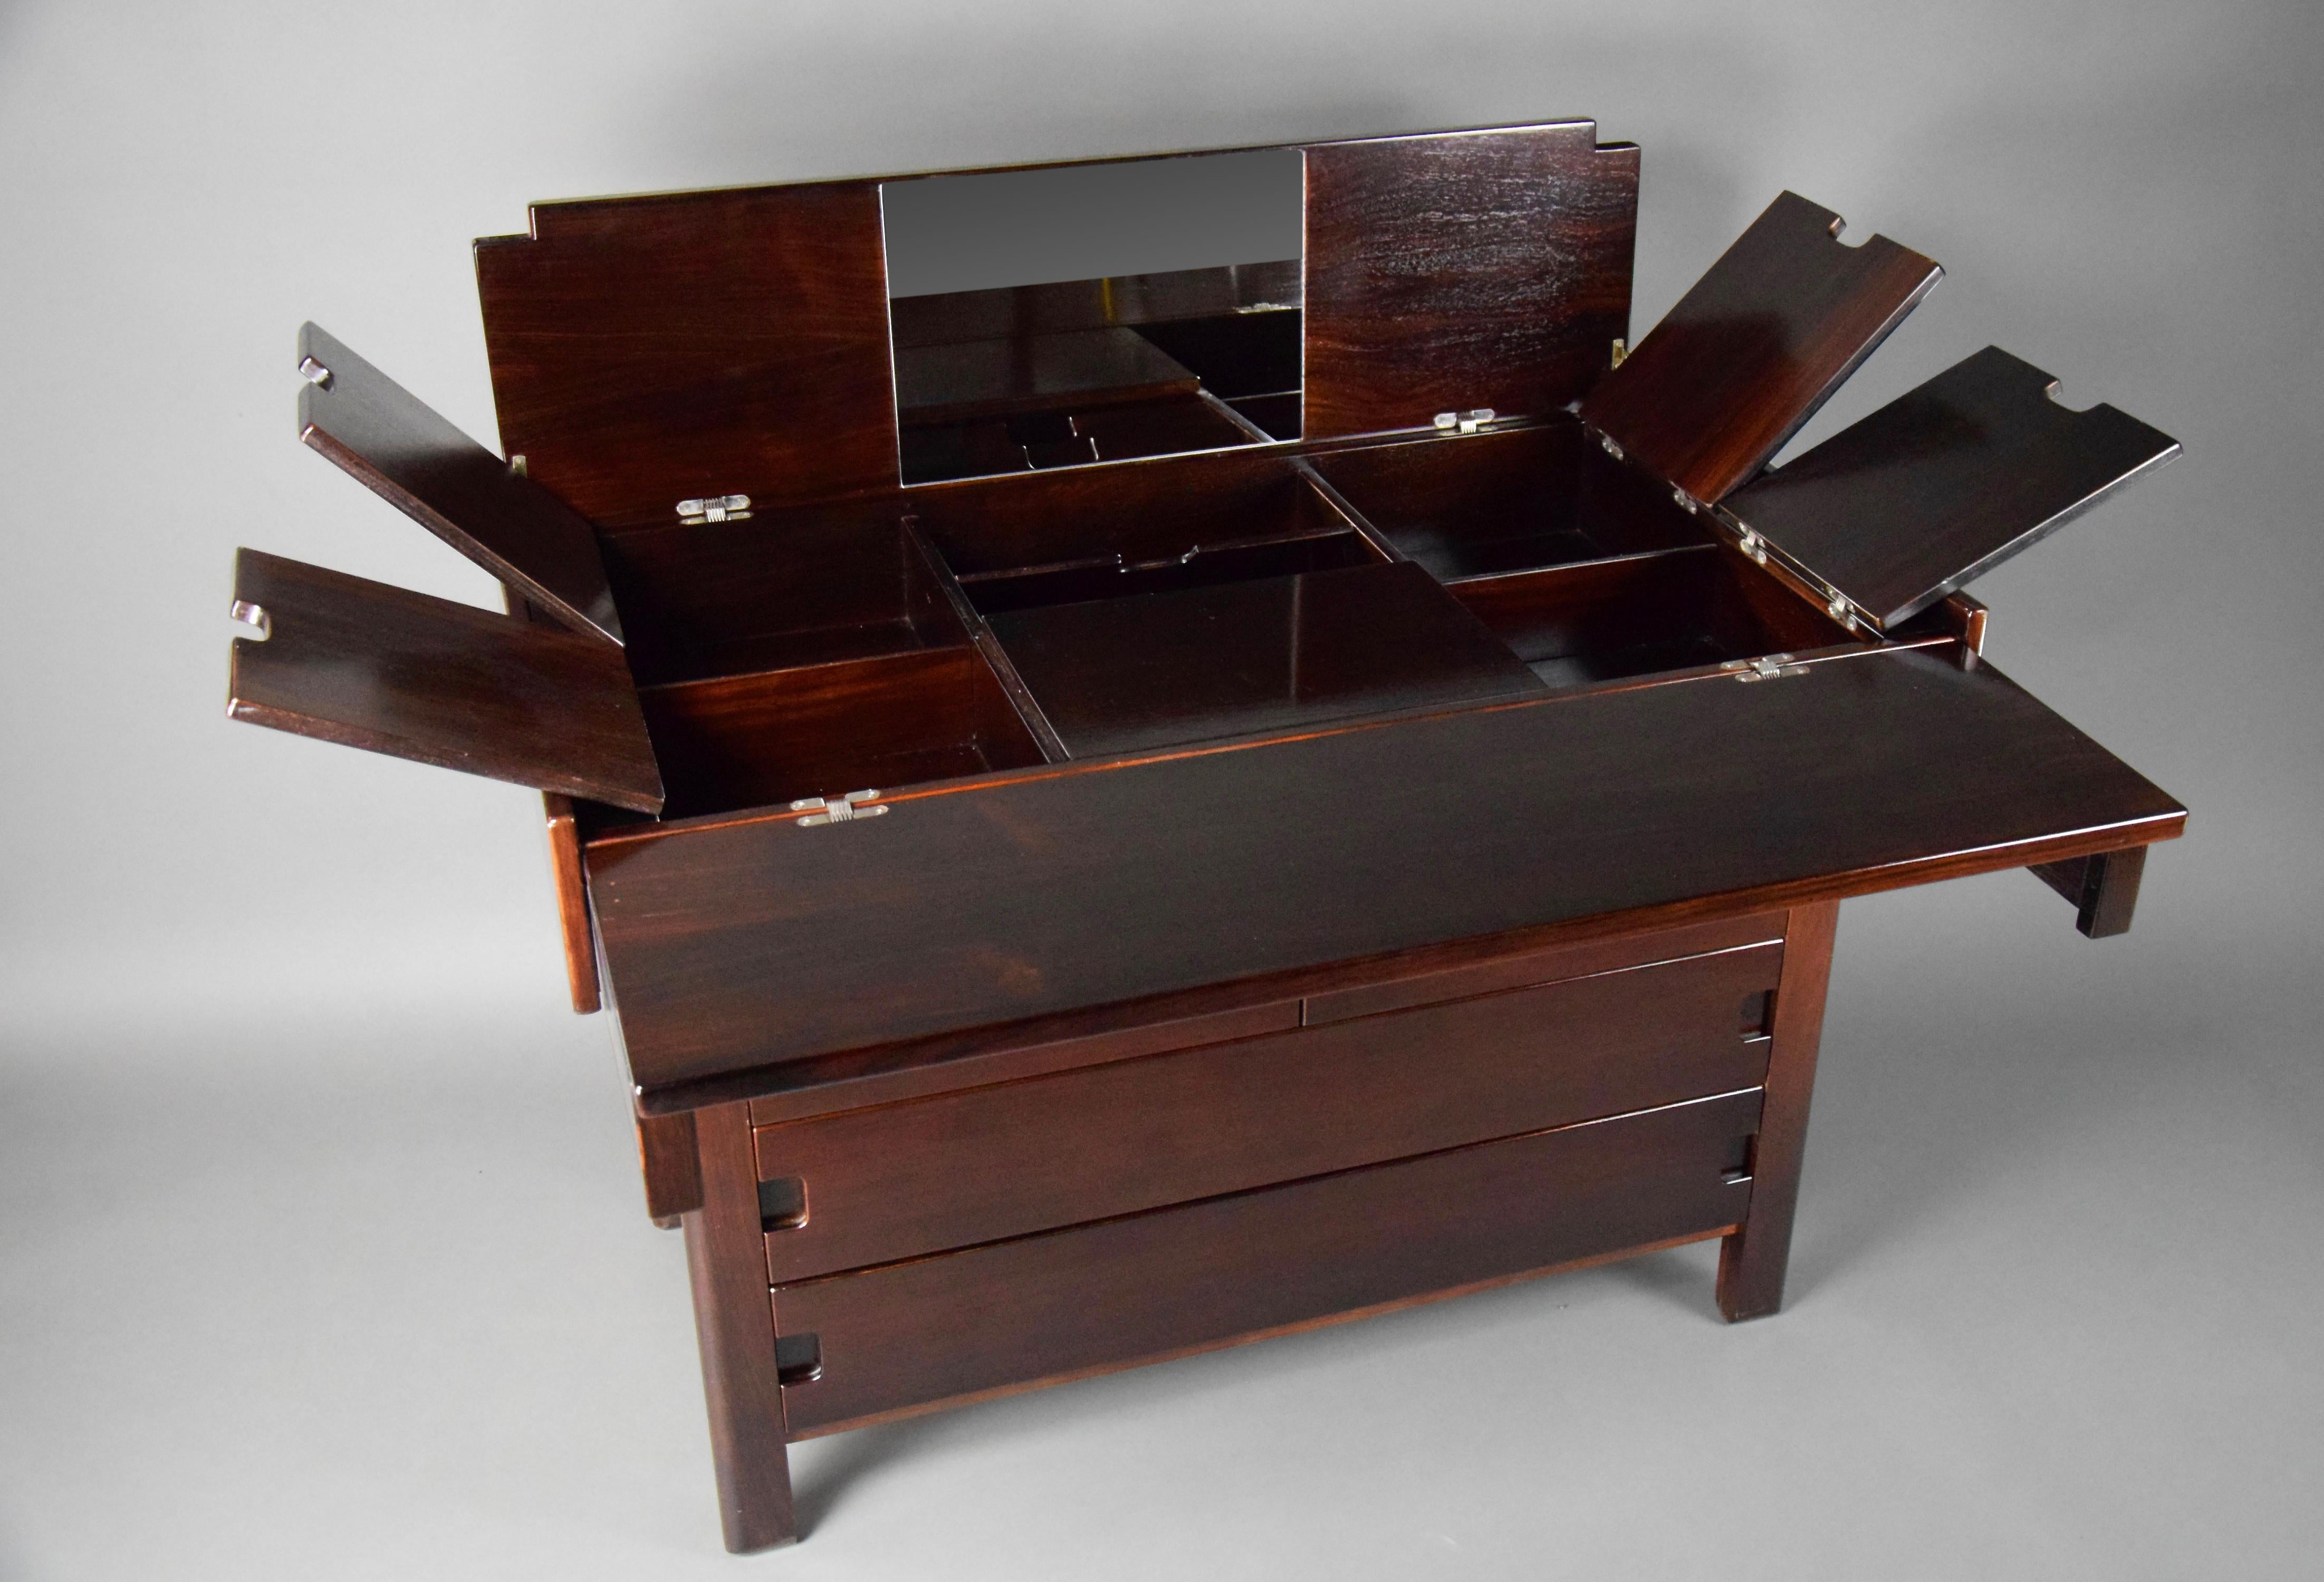 Mirror Classy and Stylish Italian 1970's Chest of Drawers Vanity and Writing Desk For Sale